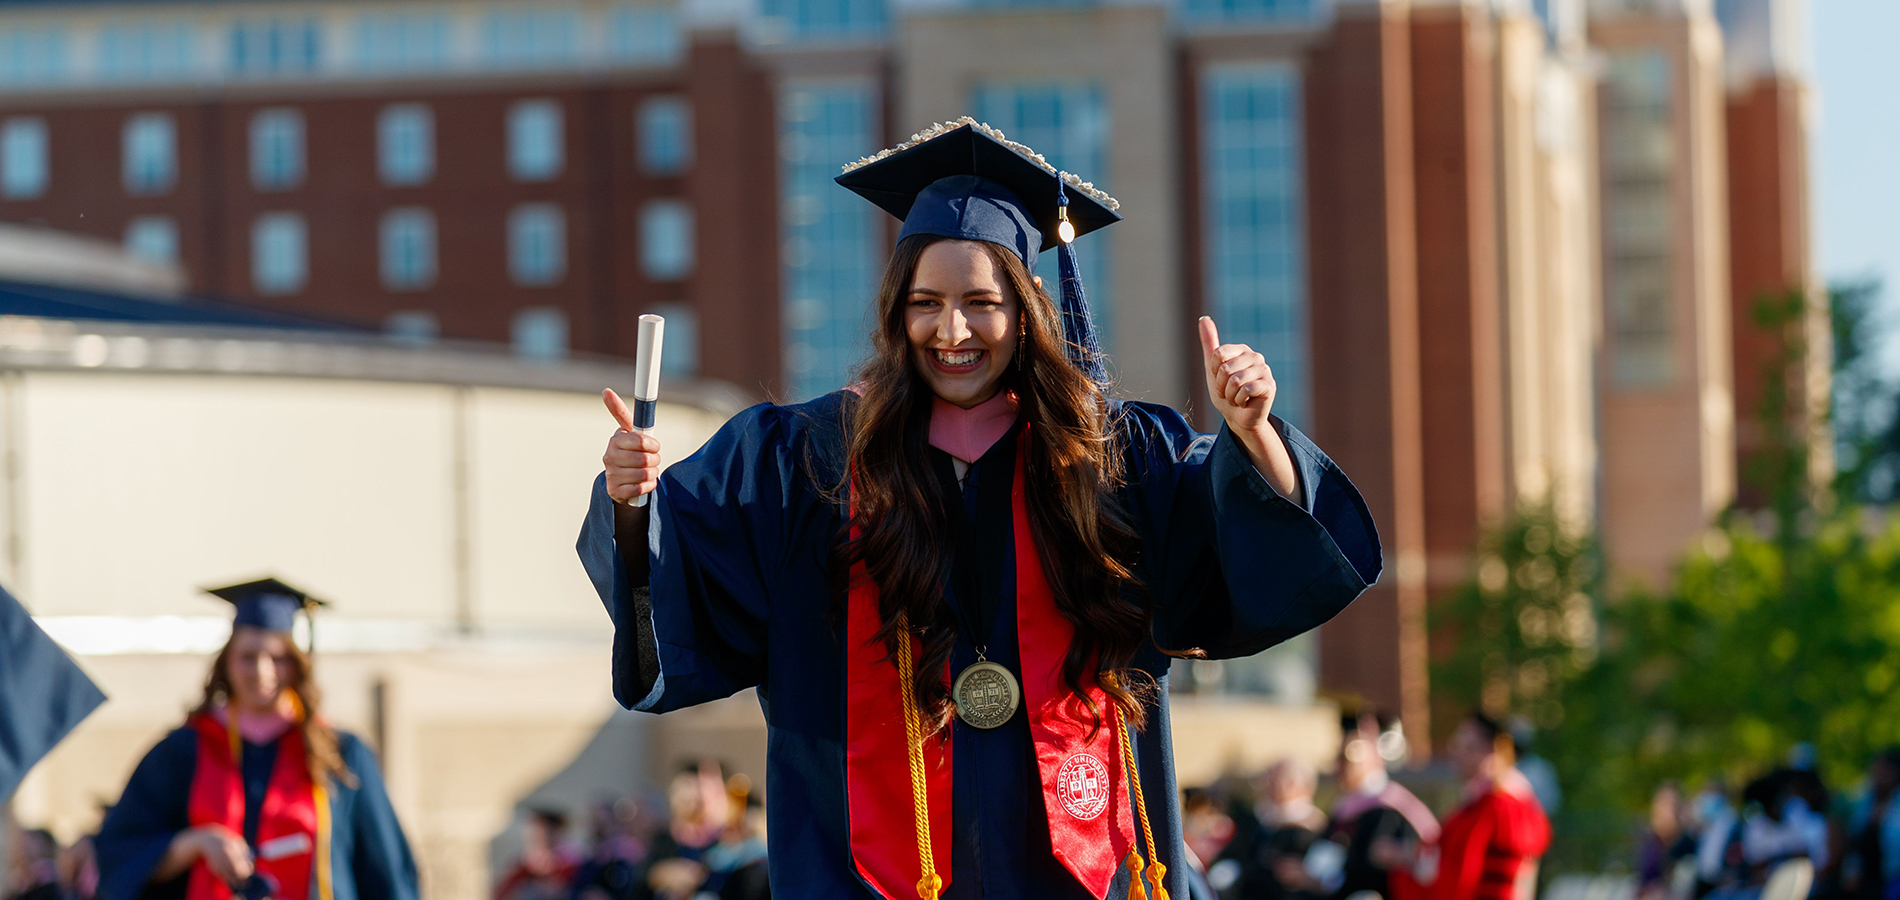 Celebrations underway for Liberty University’s 48th Commencement